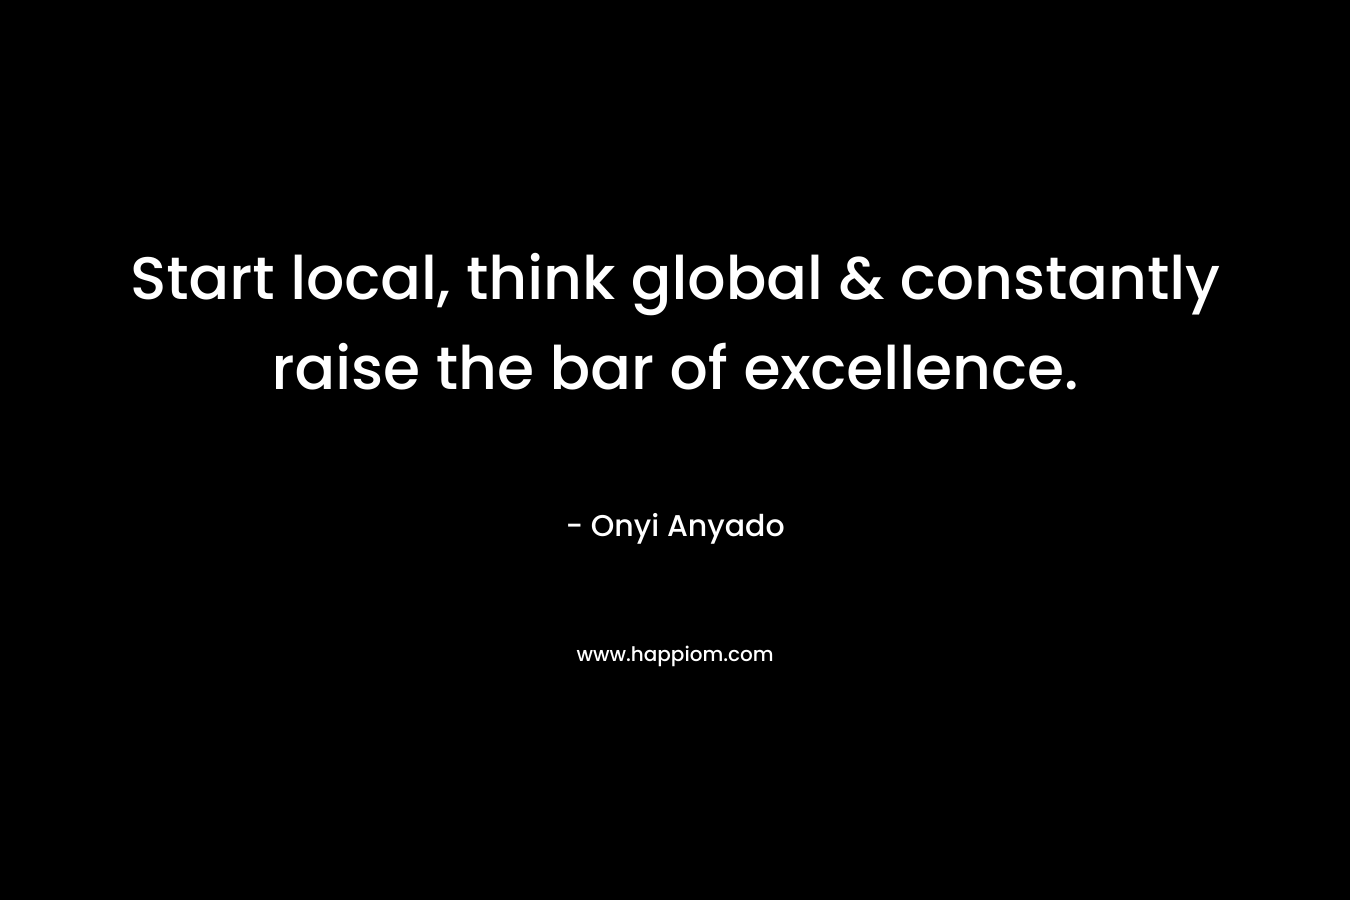 Start local, think global & constantly raise the bar of excellence. – Onyi Anyado